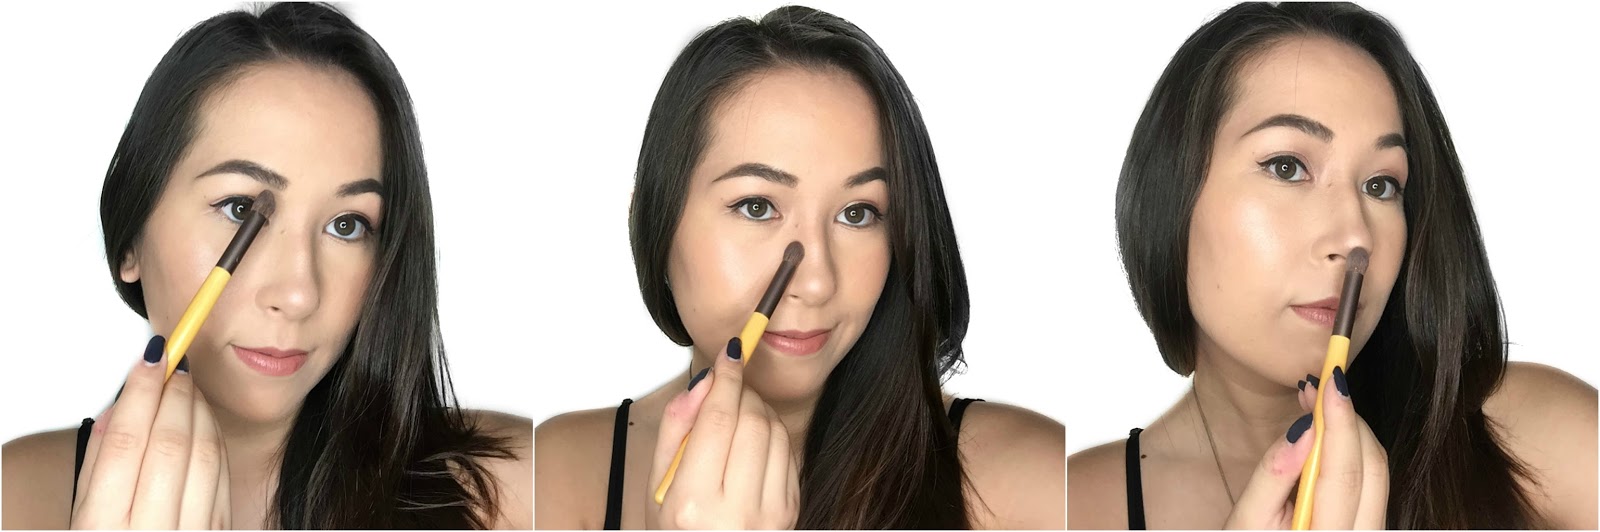 TUTORIAL: How to contour your nose to make it look smaller ...